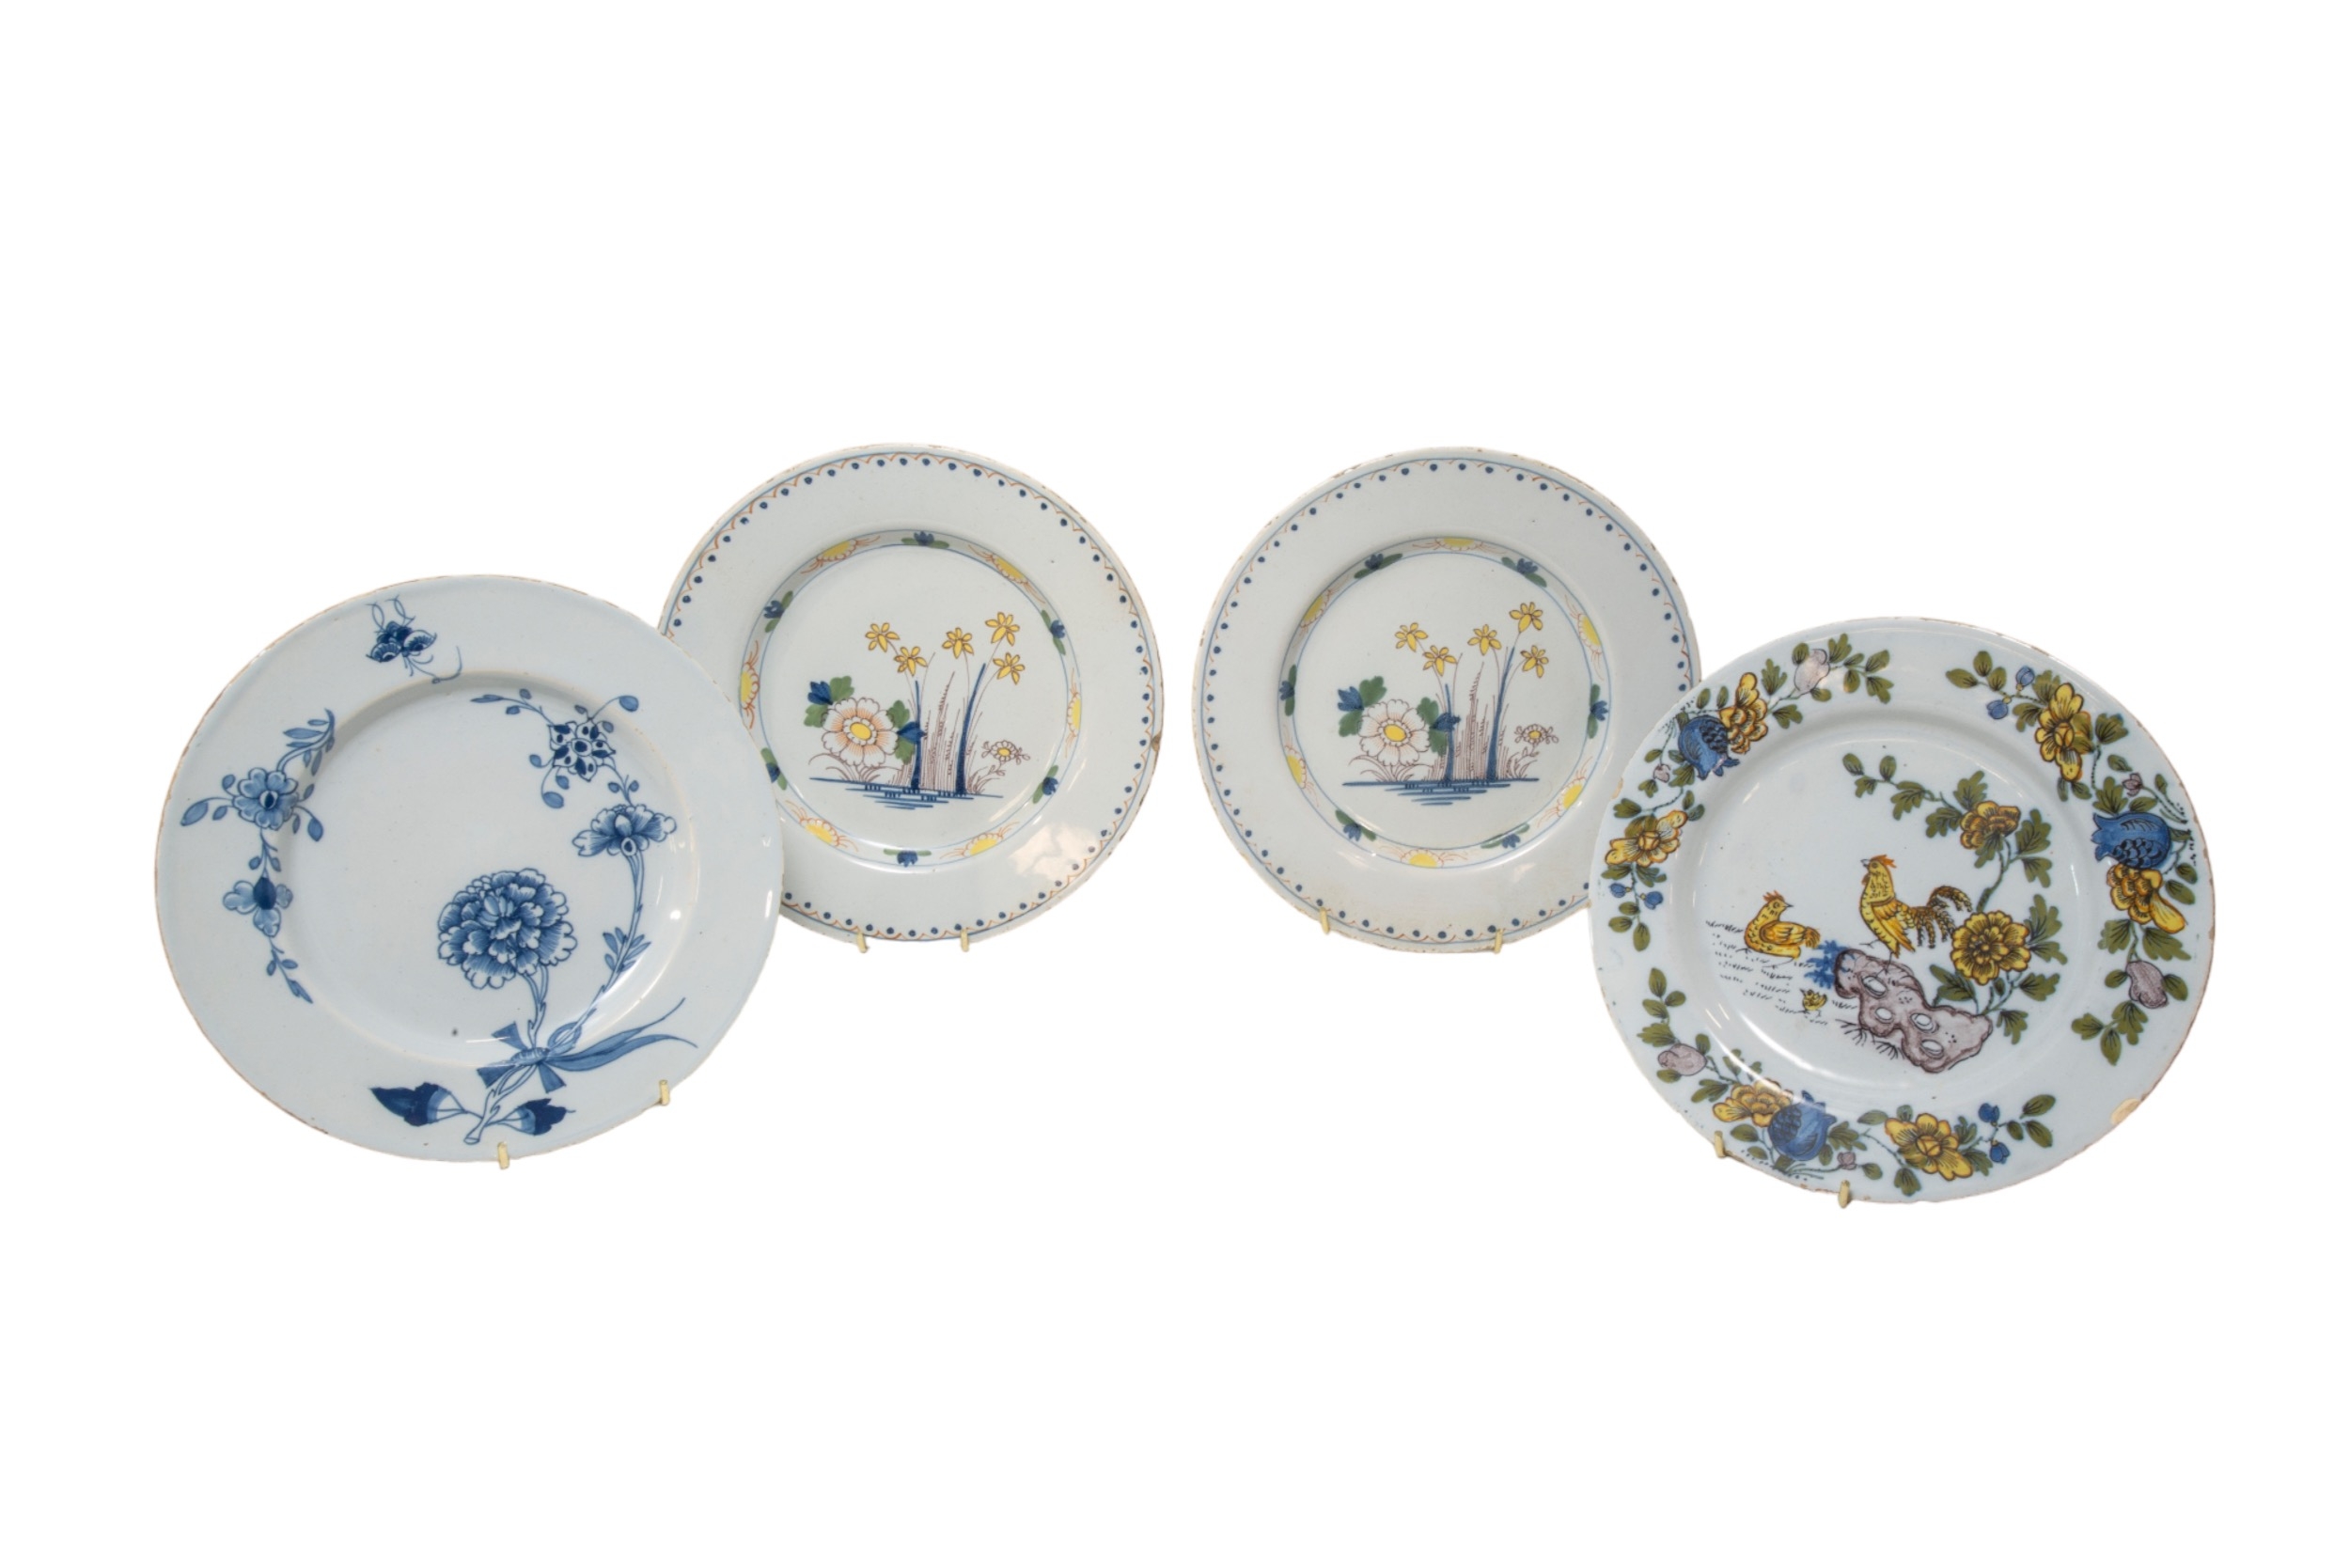 A LIVERPOOL DELFT PLATE Circa 1760, painted in Fazakerley palette and three other Delft plates